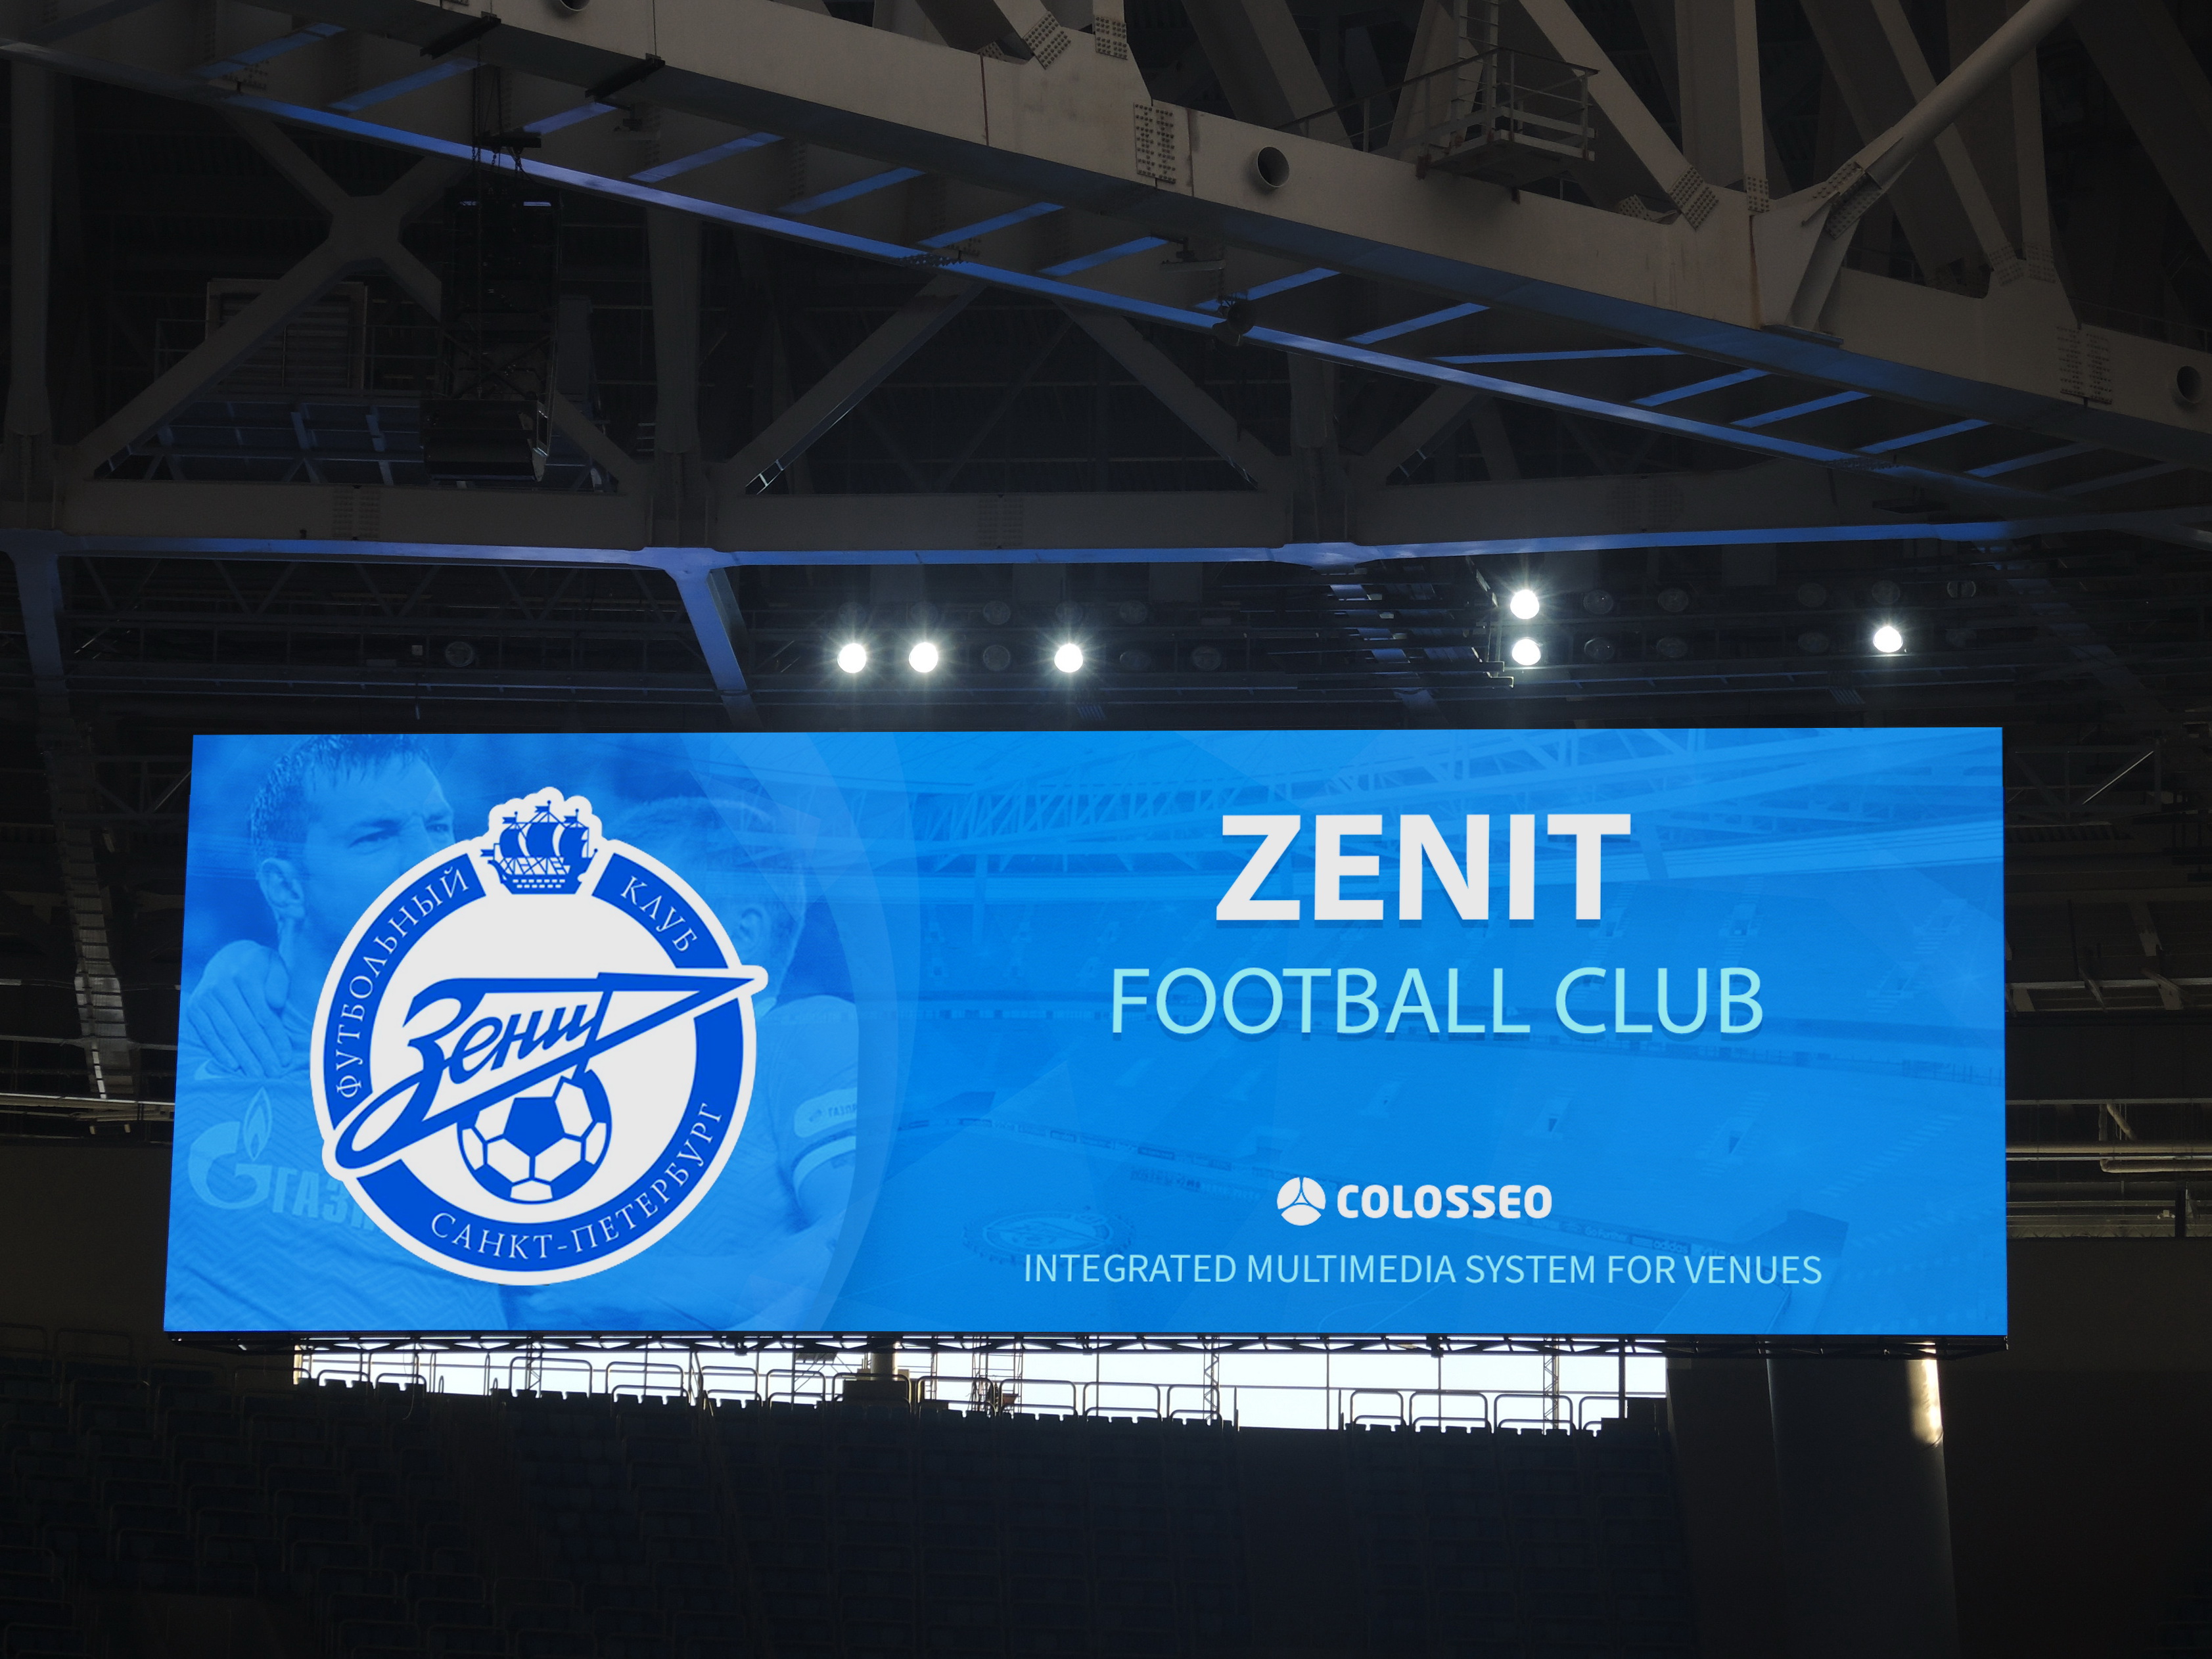 Largest Screens in a Football Stadium Installed at Newly Built Zenit Arena | Newswire